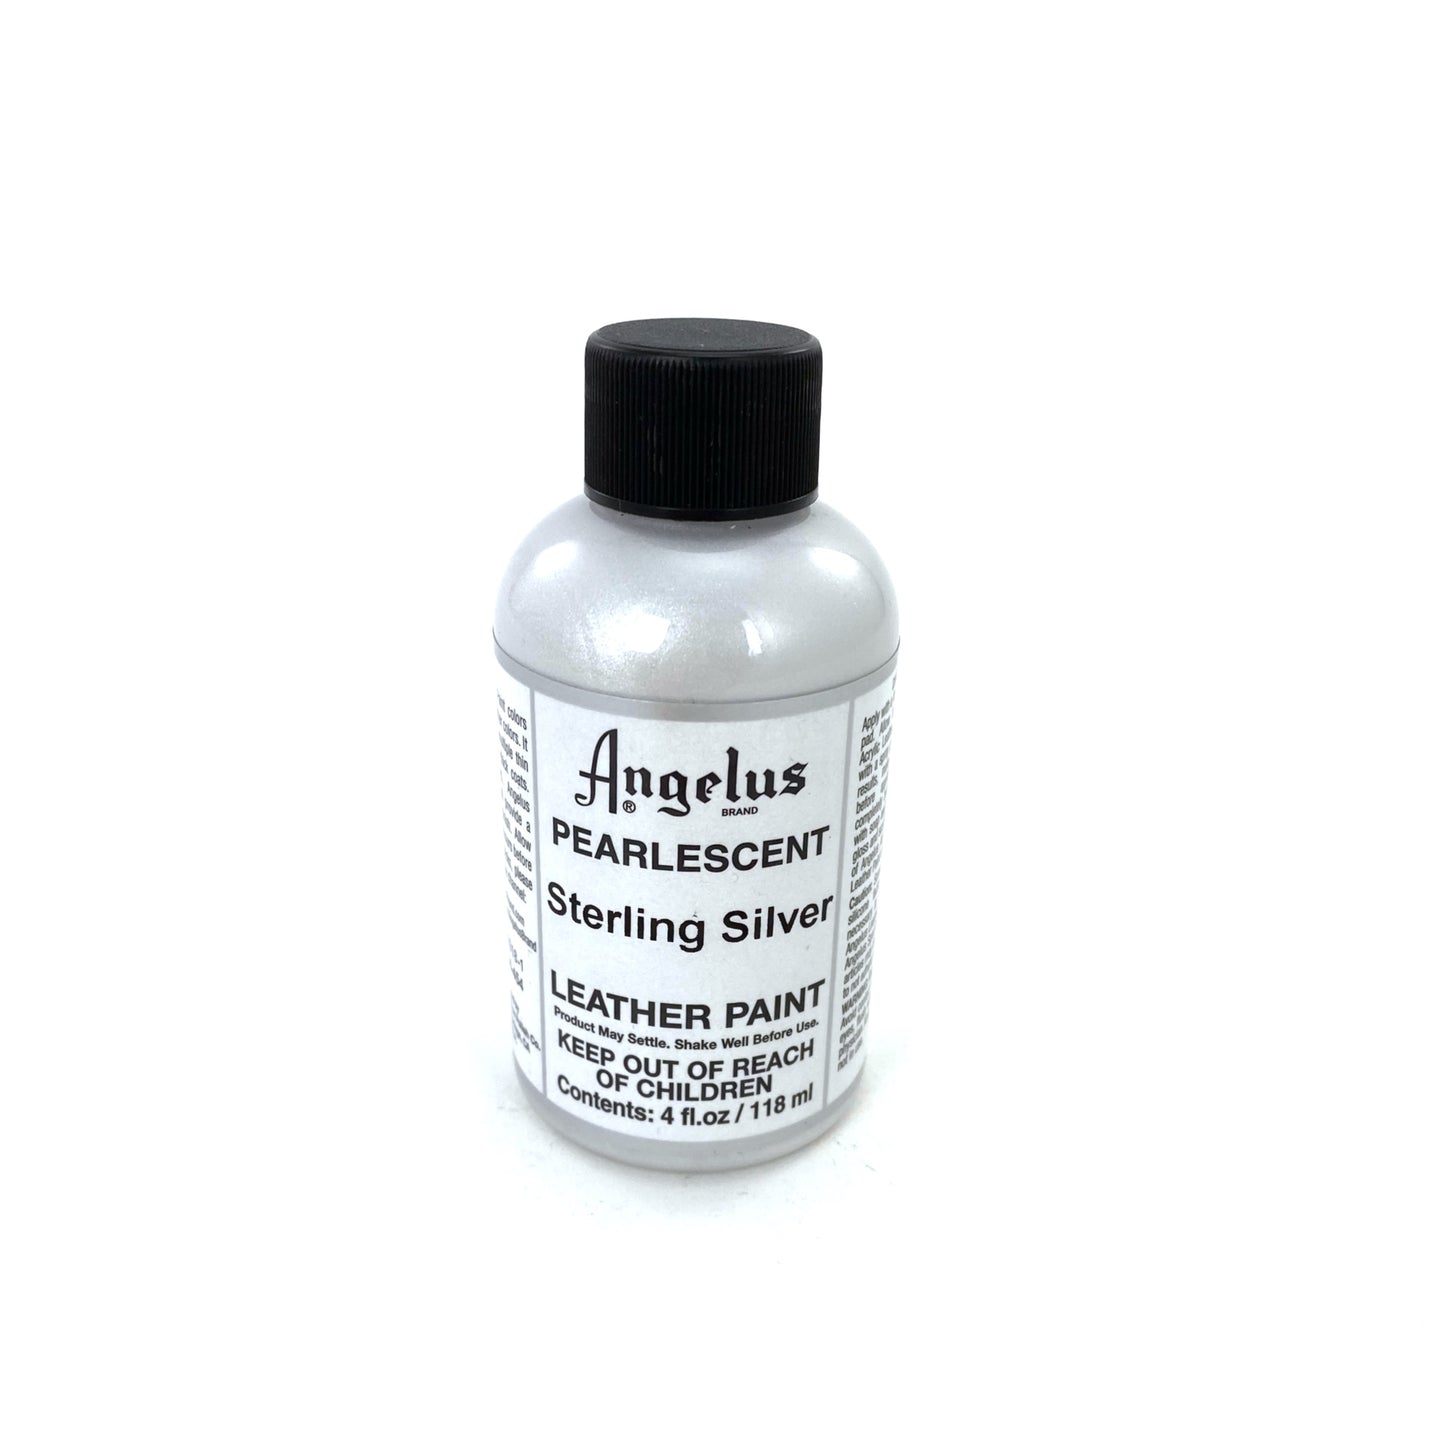 Angelus Acrylic Leather Paint - 4 oz. - Pearlescent Sterling Silver by Angelus - K. A. Artist Shop